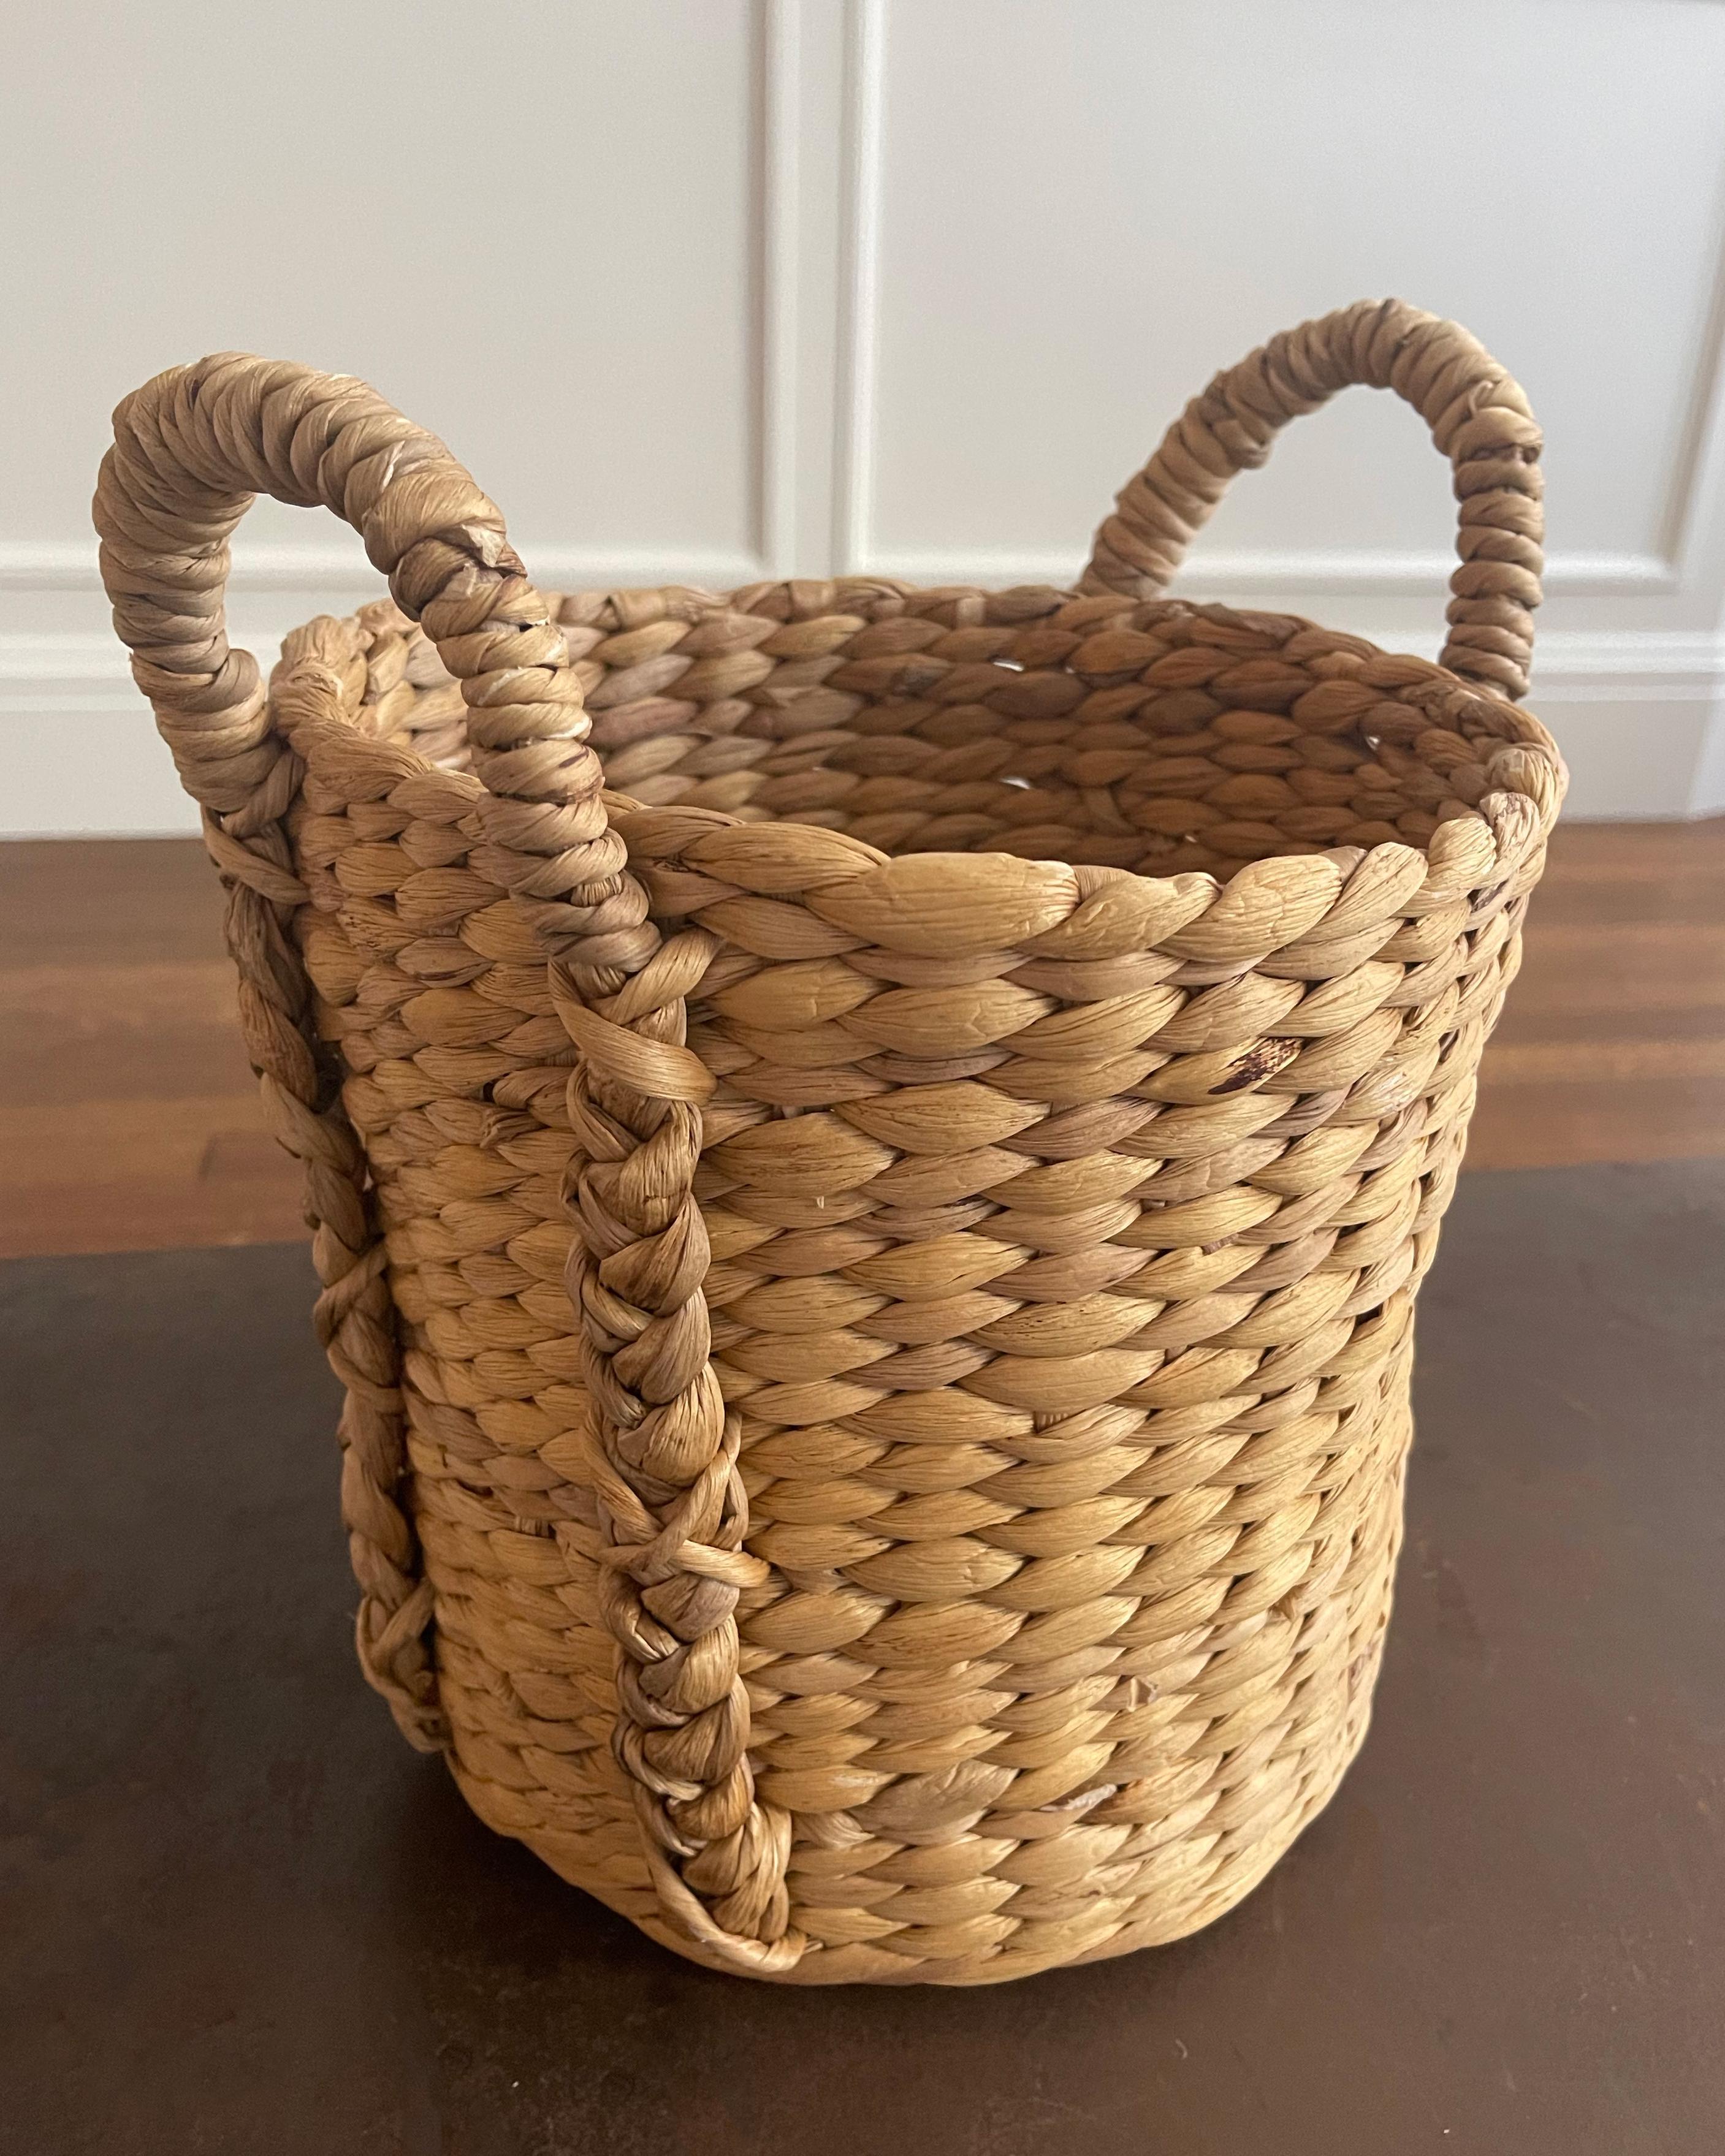 Extra small beachcomber-style basket handwoven from natural fibers.